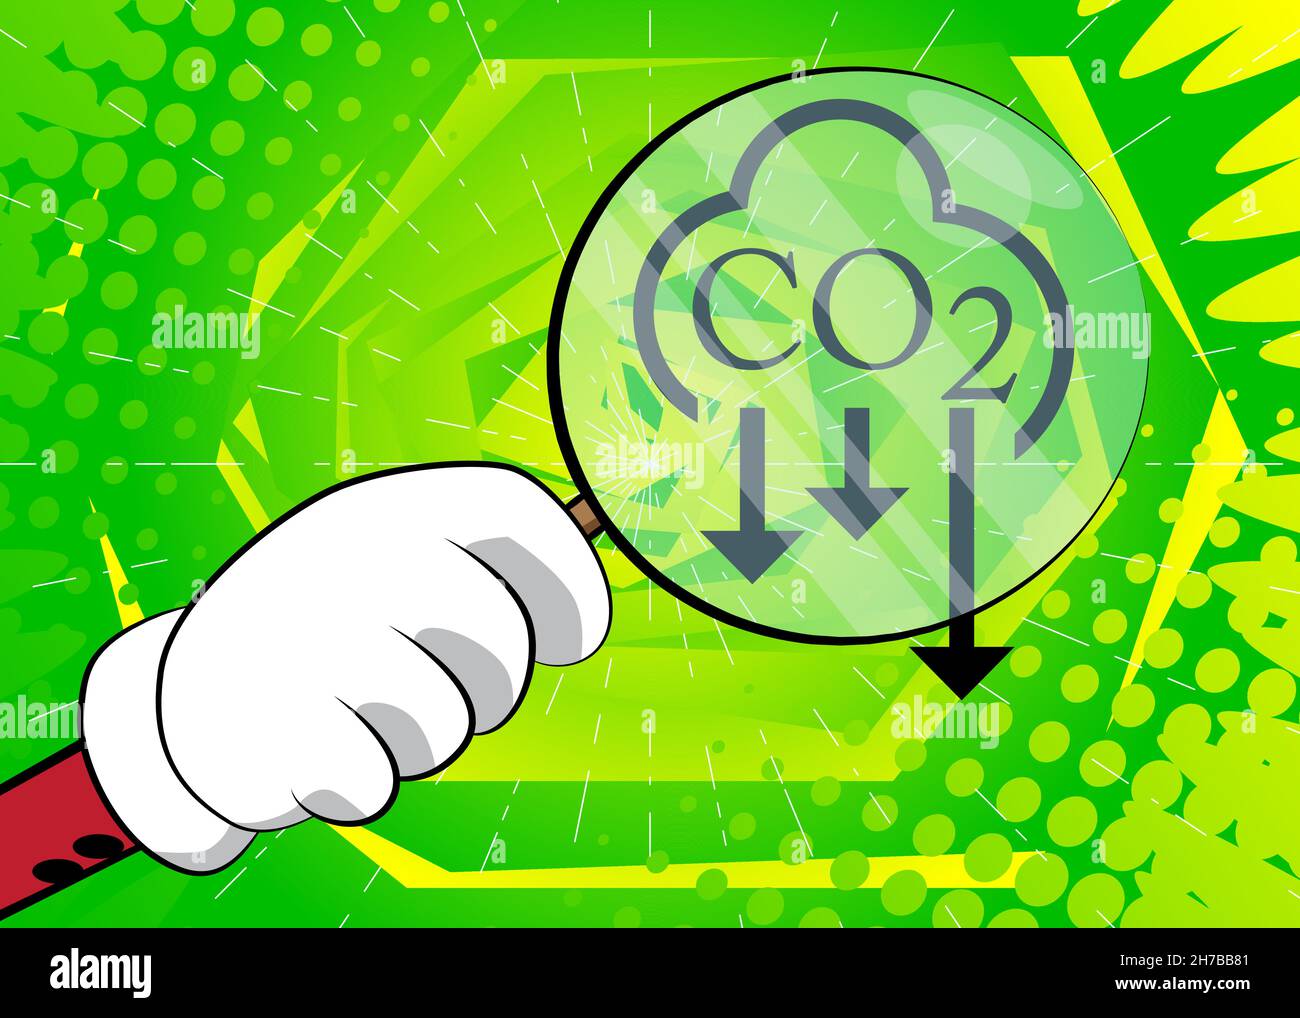 CO2 emission sign, Carbon dioxide icon under magnifying glass illustration on comic book background. Stock Vector